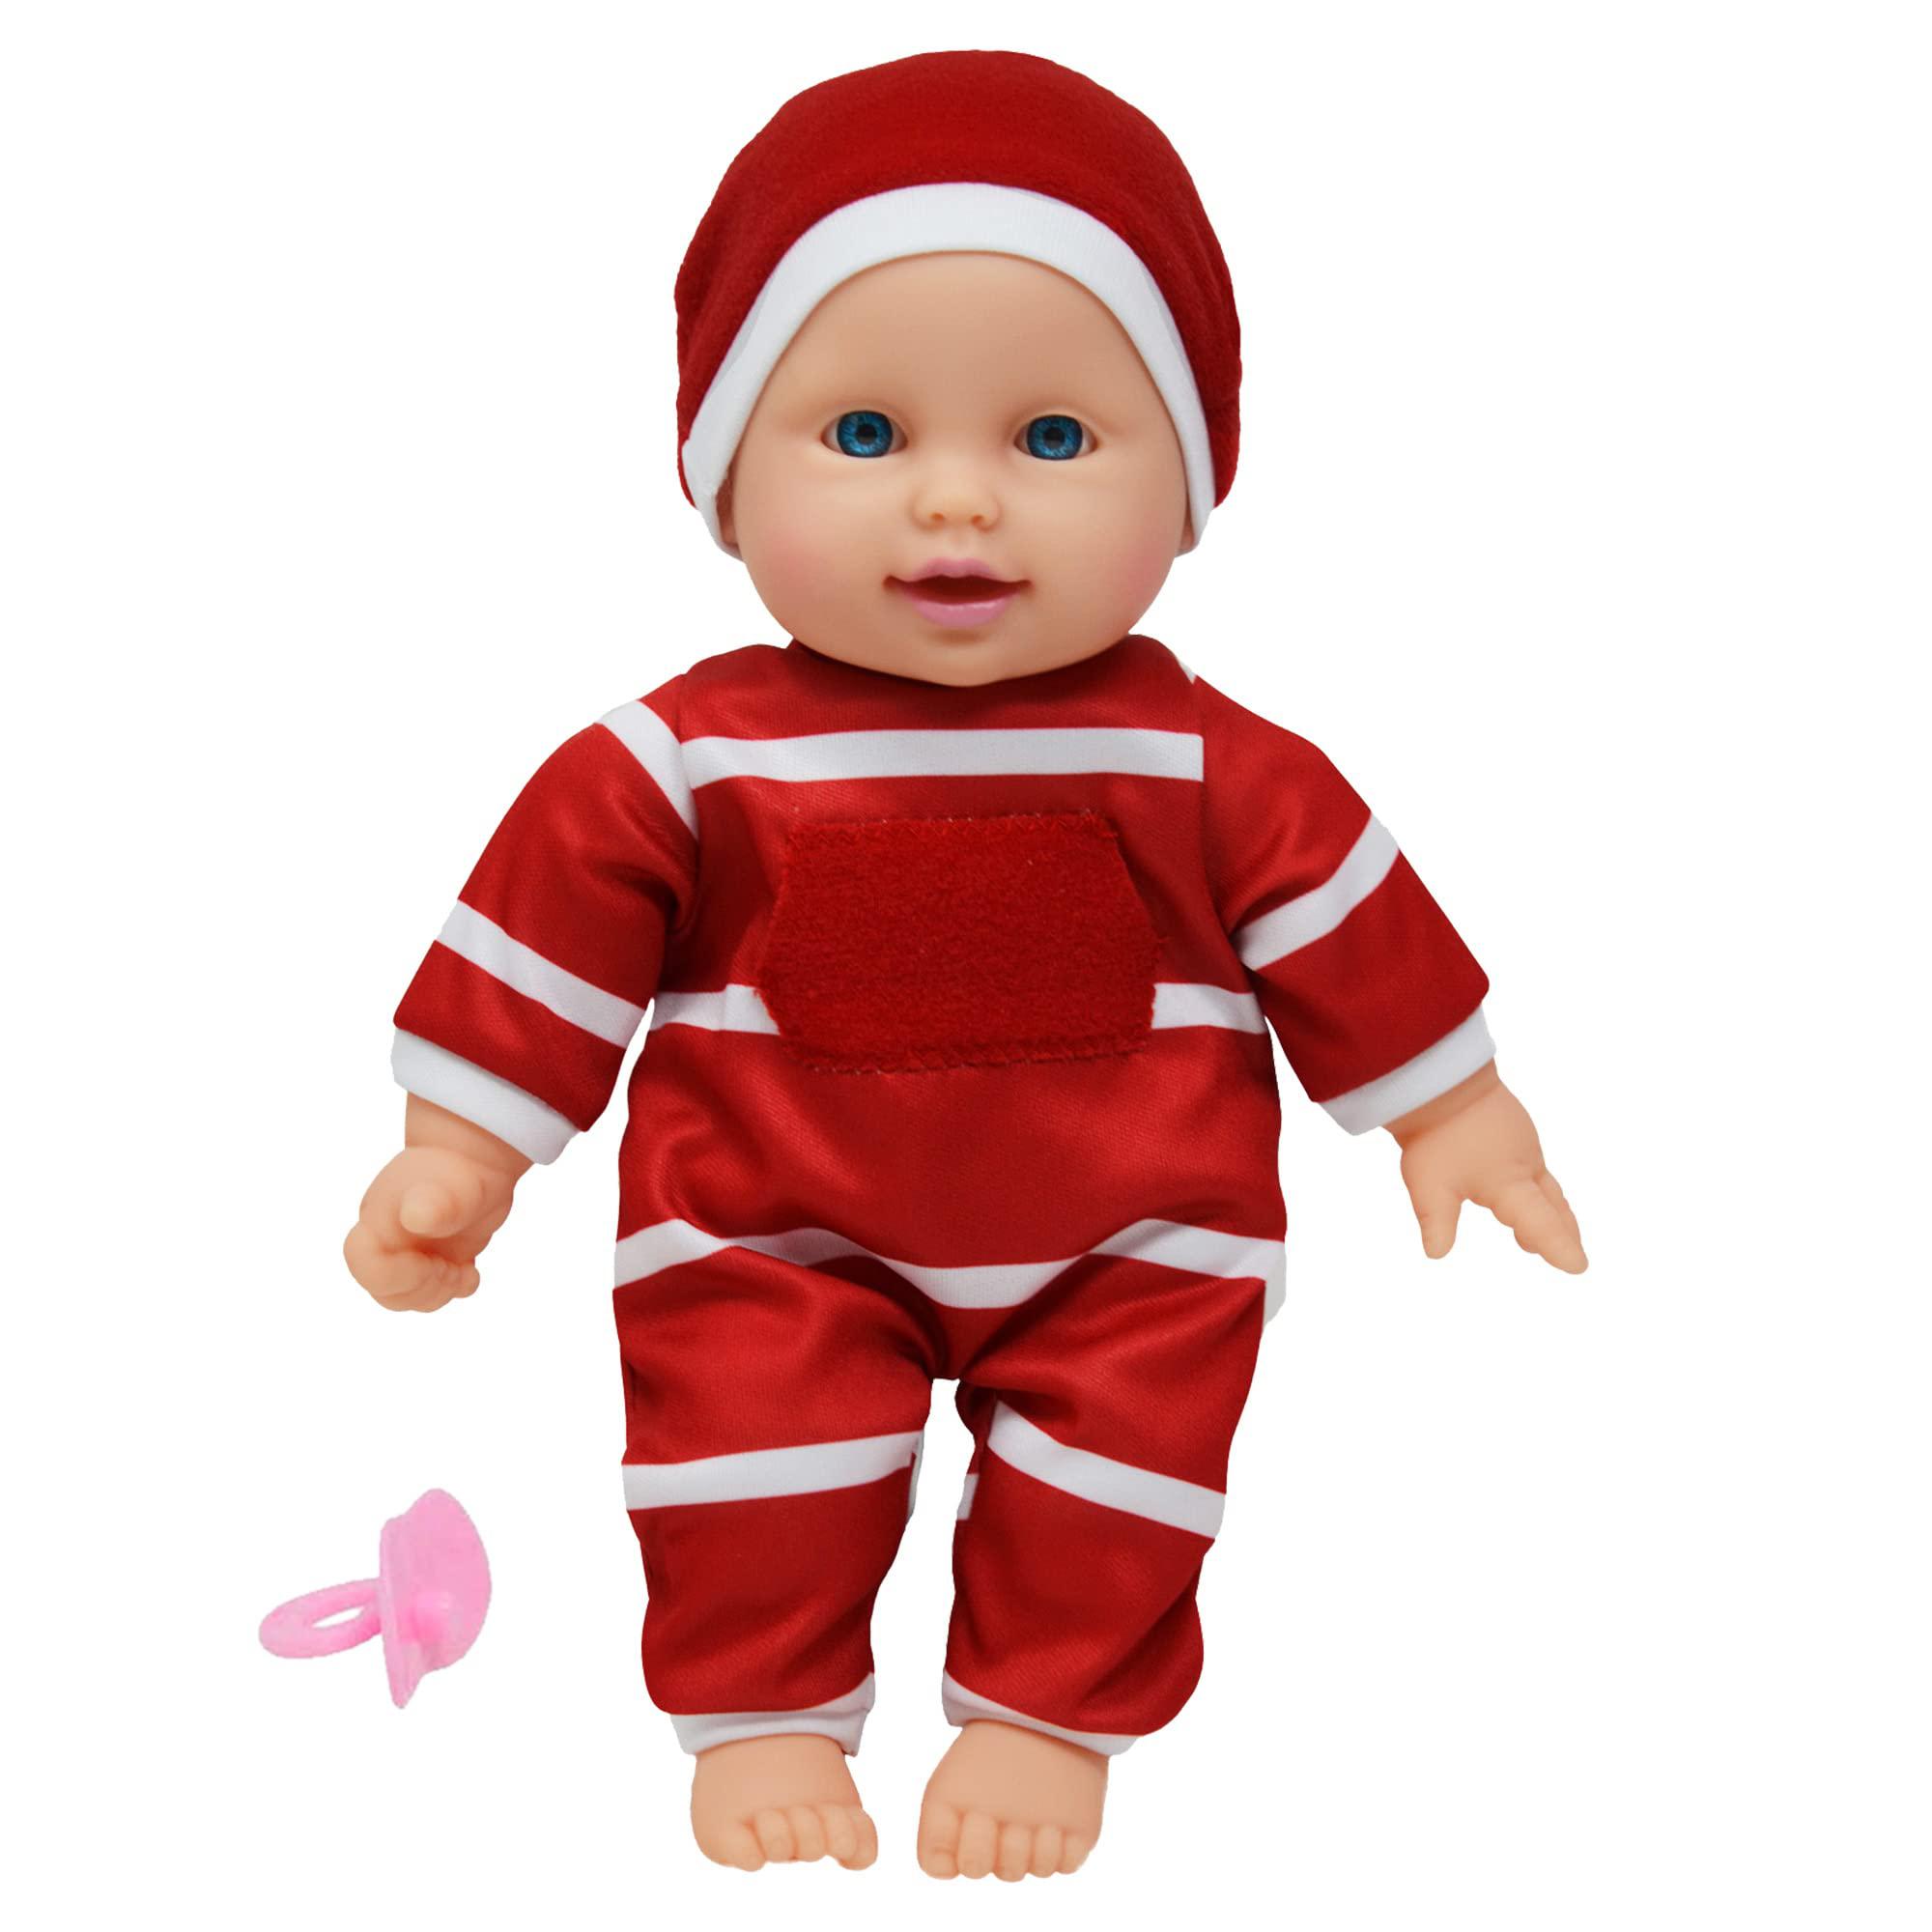 the new york doll collection 11 inch soft body baby doll in gift box - 11" baby doll toy for kids, boys, girls and toddlers -